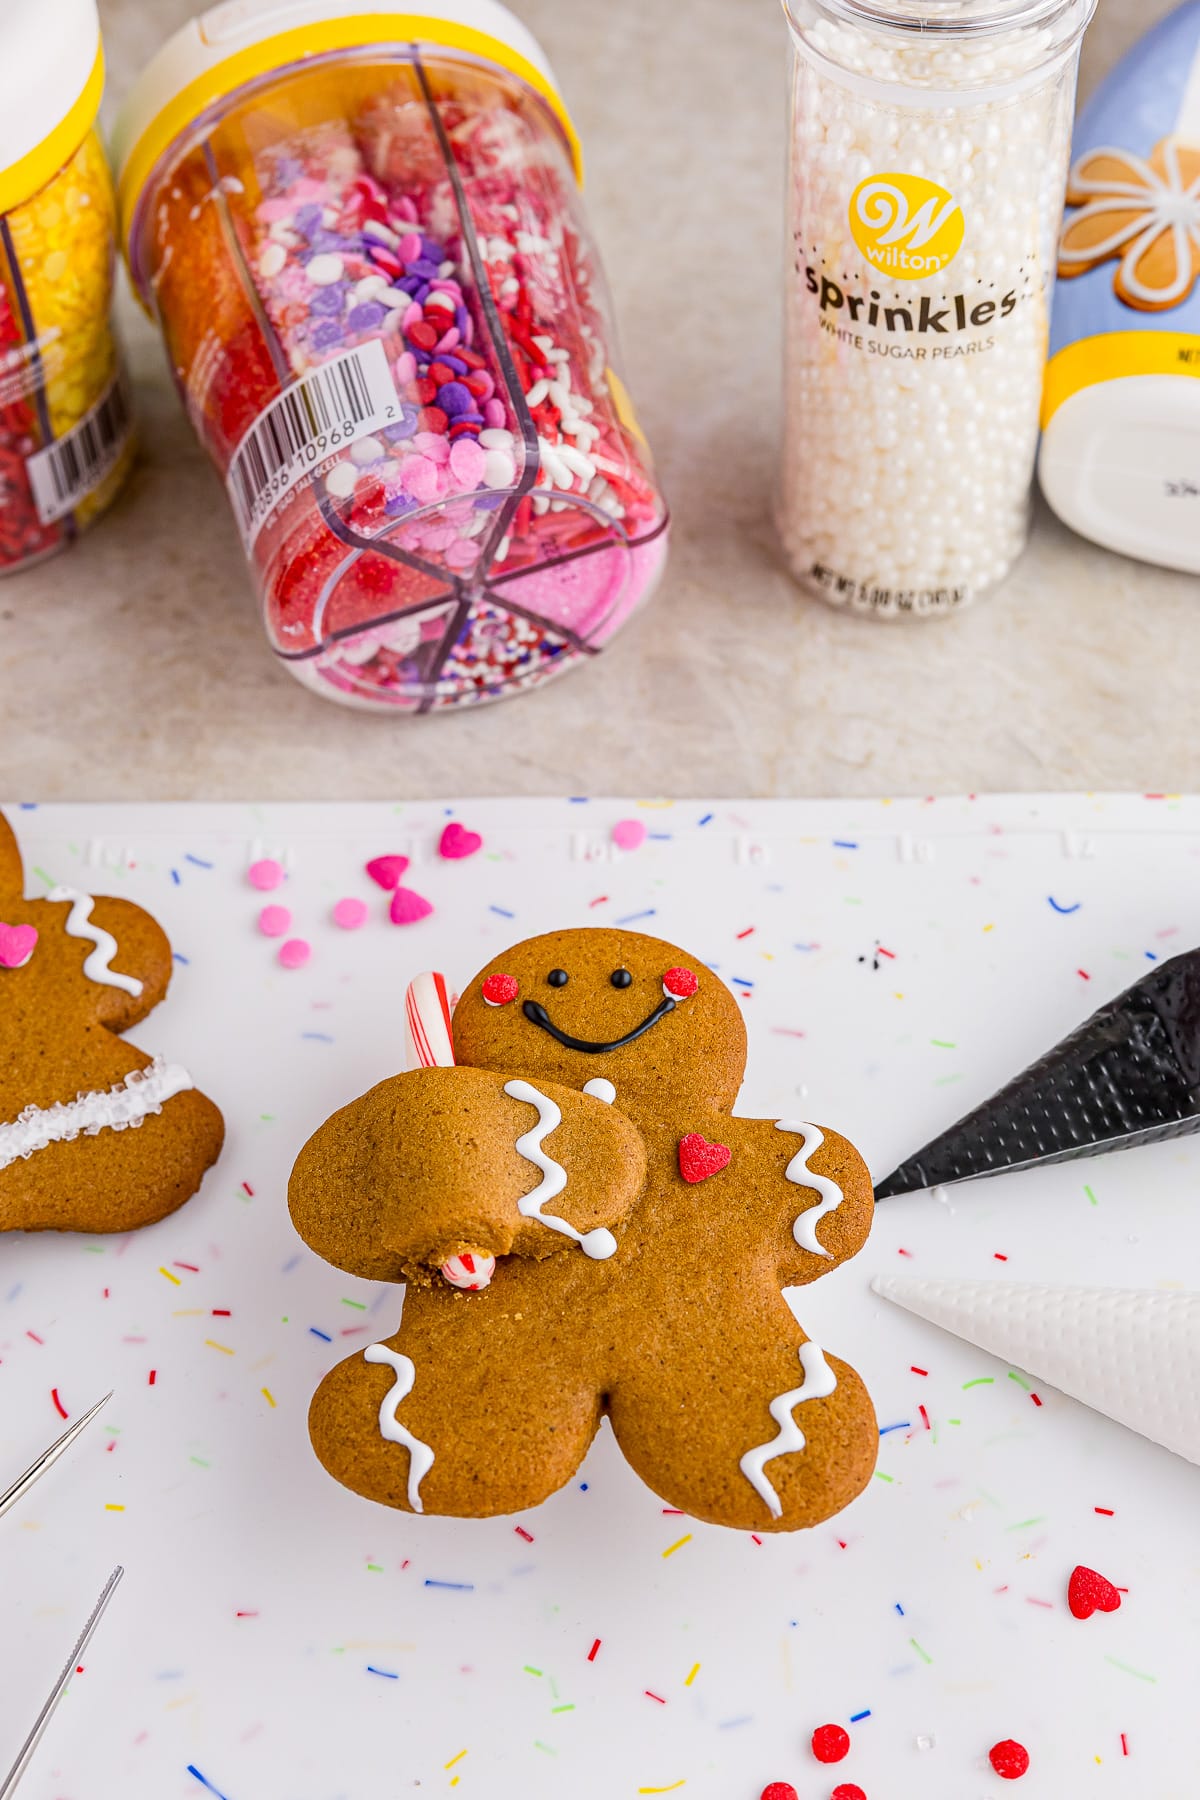 decorated gingerbread man with frosting and sprinkles in the background